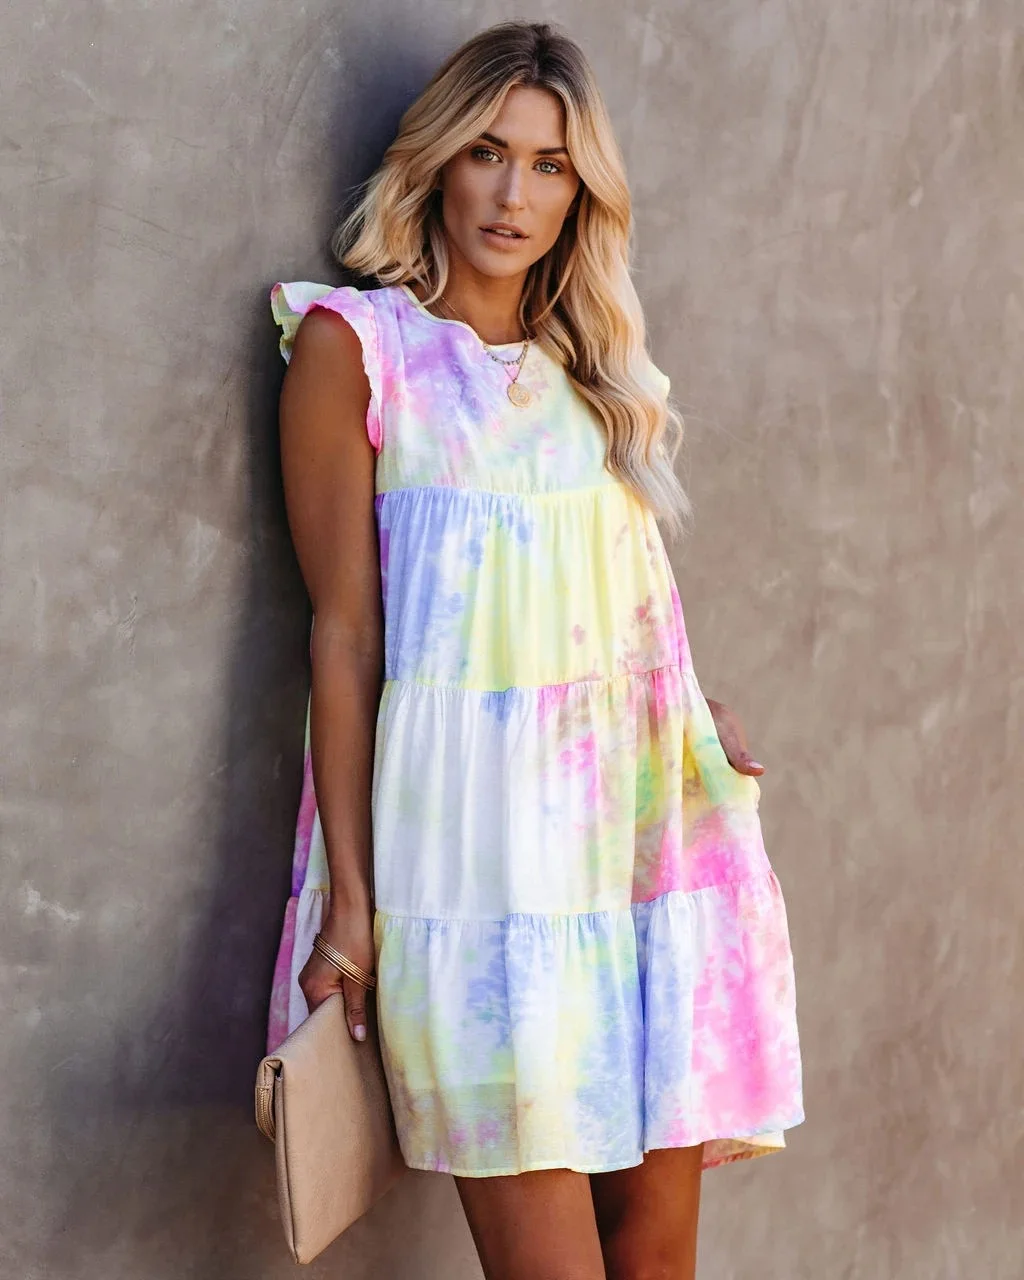 

Amazon Tie Dyed Round Neck Women's Dress Print New Spring and Summer Casual Dresses Spandex / Cotton Vintage Chiffon Plain Dyed